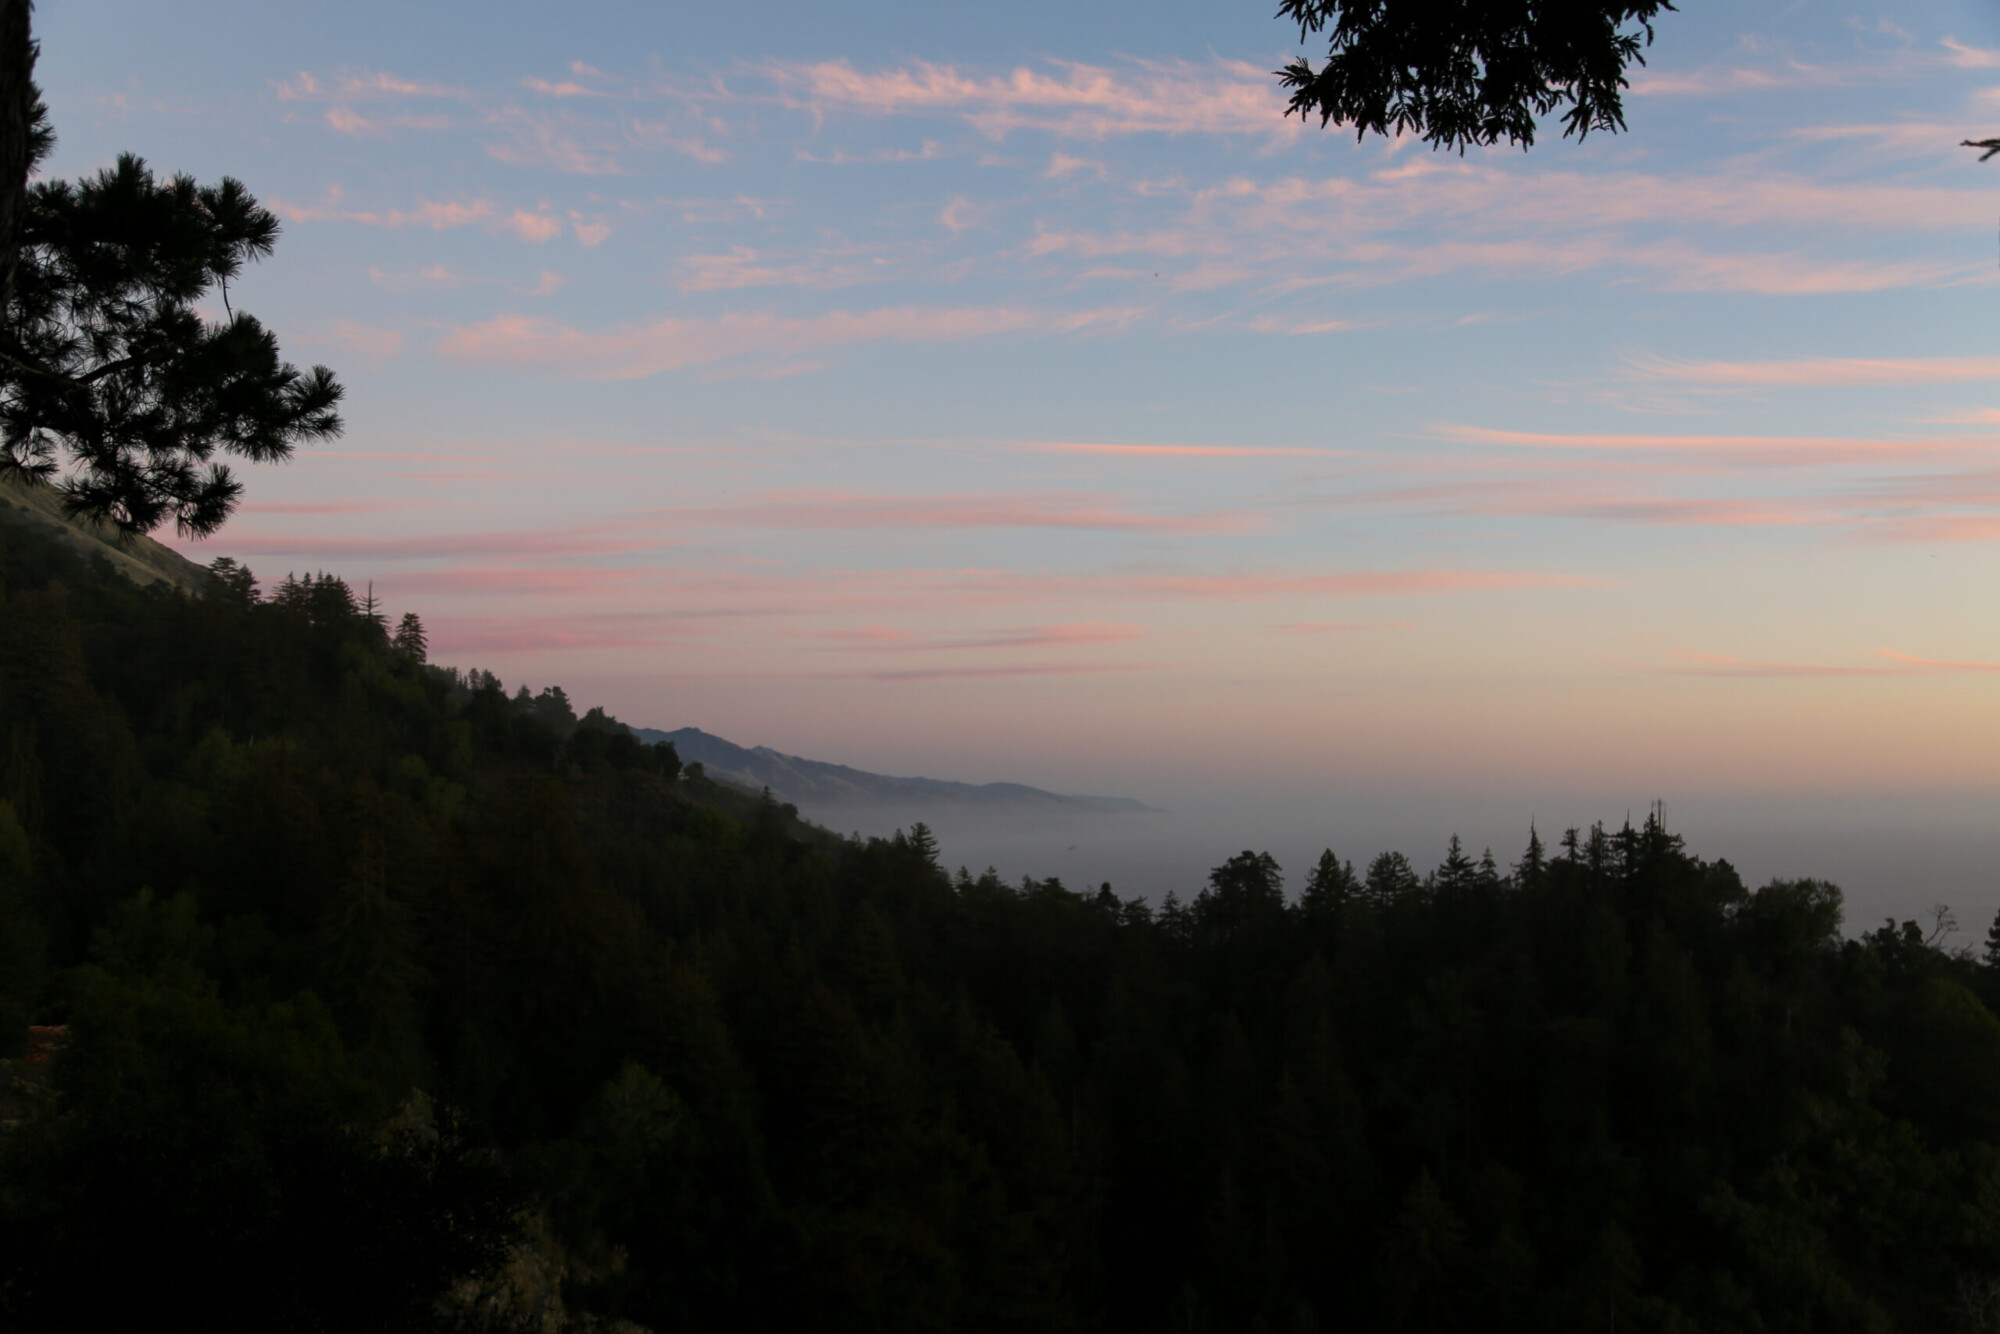 Landscape view of a hilly tree scape at sunset in Big Sur, California.